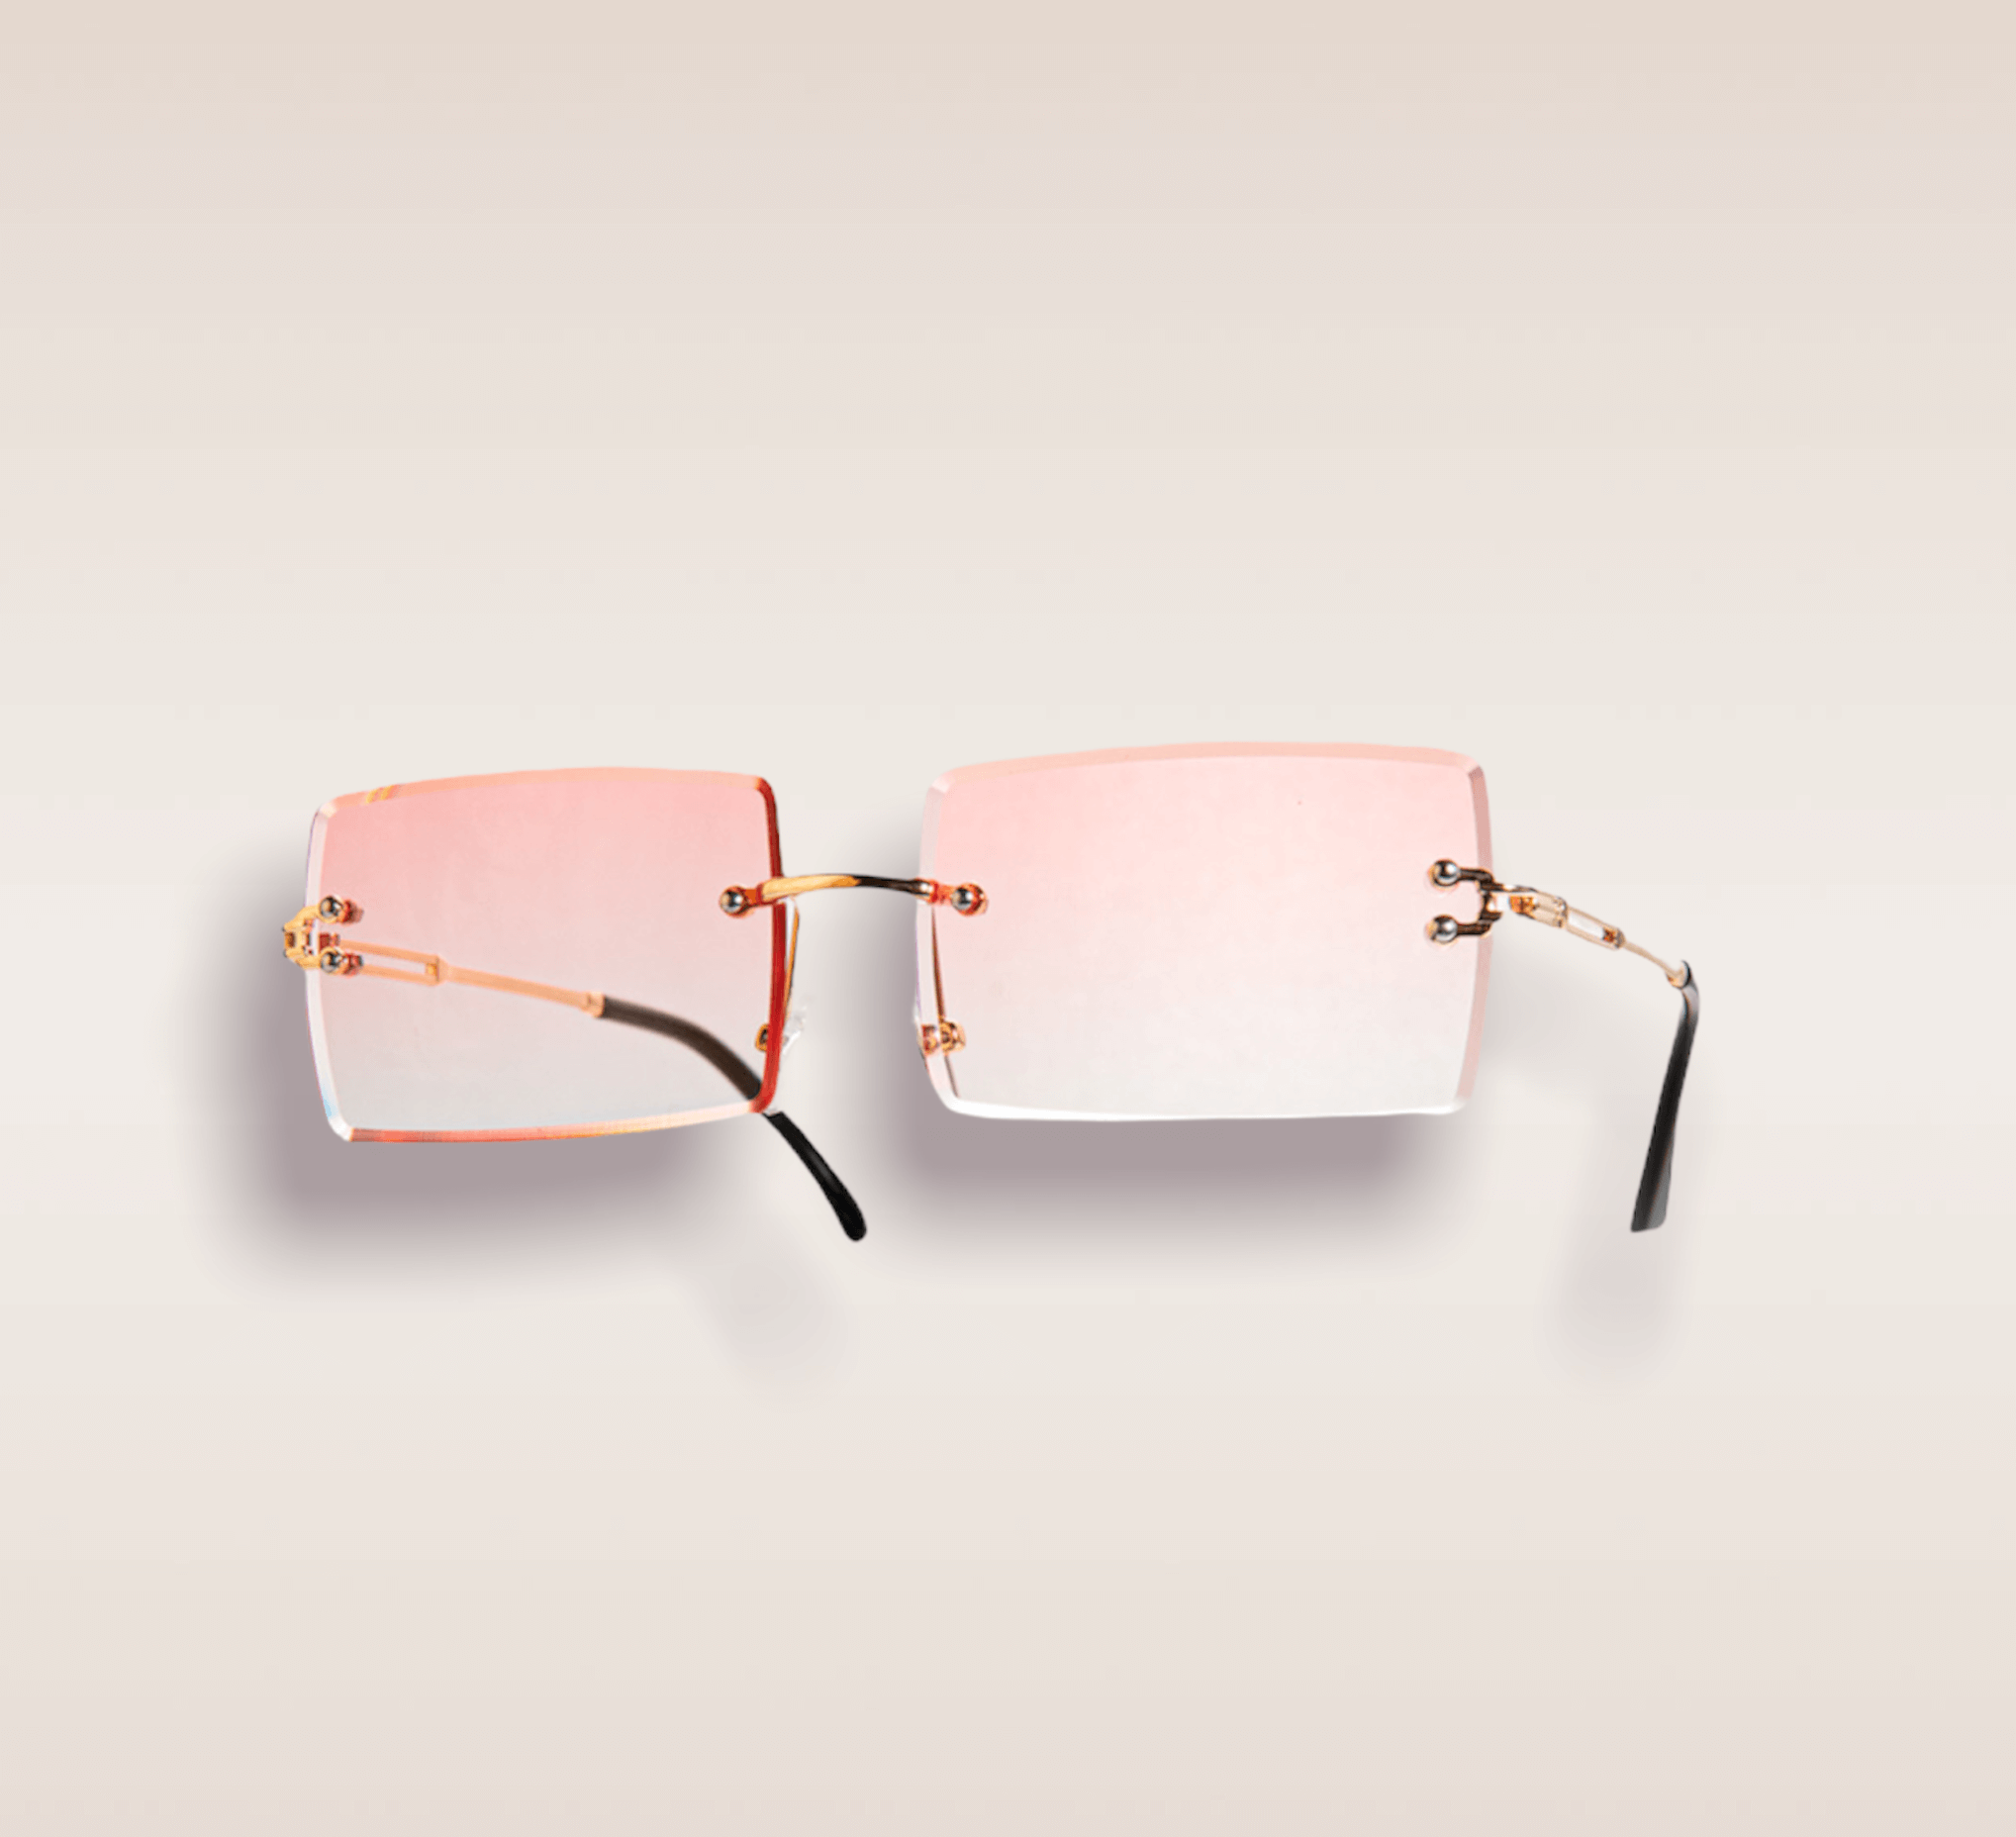 In this up-close shot, we are greeted by a captivating pair of eyeglasses that radiate elegance and personality. The frames boast a delicate combination of pink and gold, intertwining to create a mesmerizing visual spectacle. The soft hue of pink adds a touch of femininity and grace, while the golden accents lend a sense of luxury and sophistication. These frames are a true fashion statement, drawing attention to the eyes with their unique and striking design. The intricate interplay between the pink and gold hues exudes a sense of artistry and individuality, capturing the essence of personal style and self-expression.